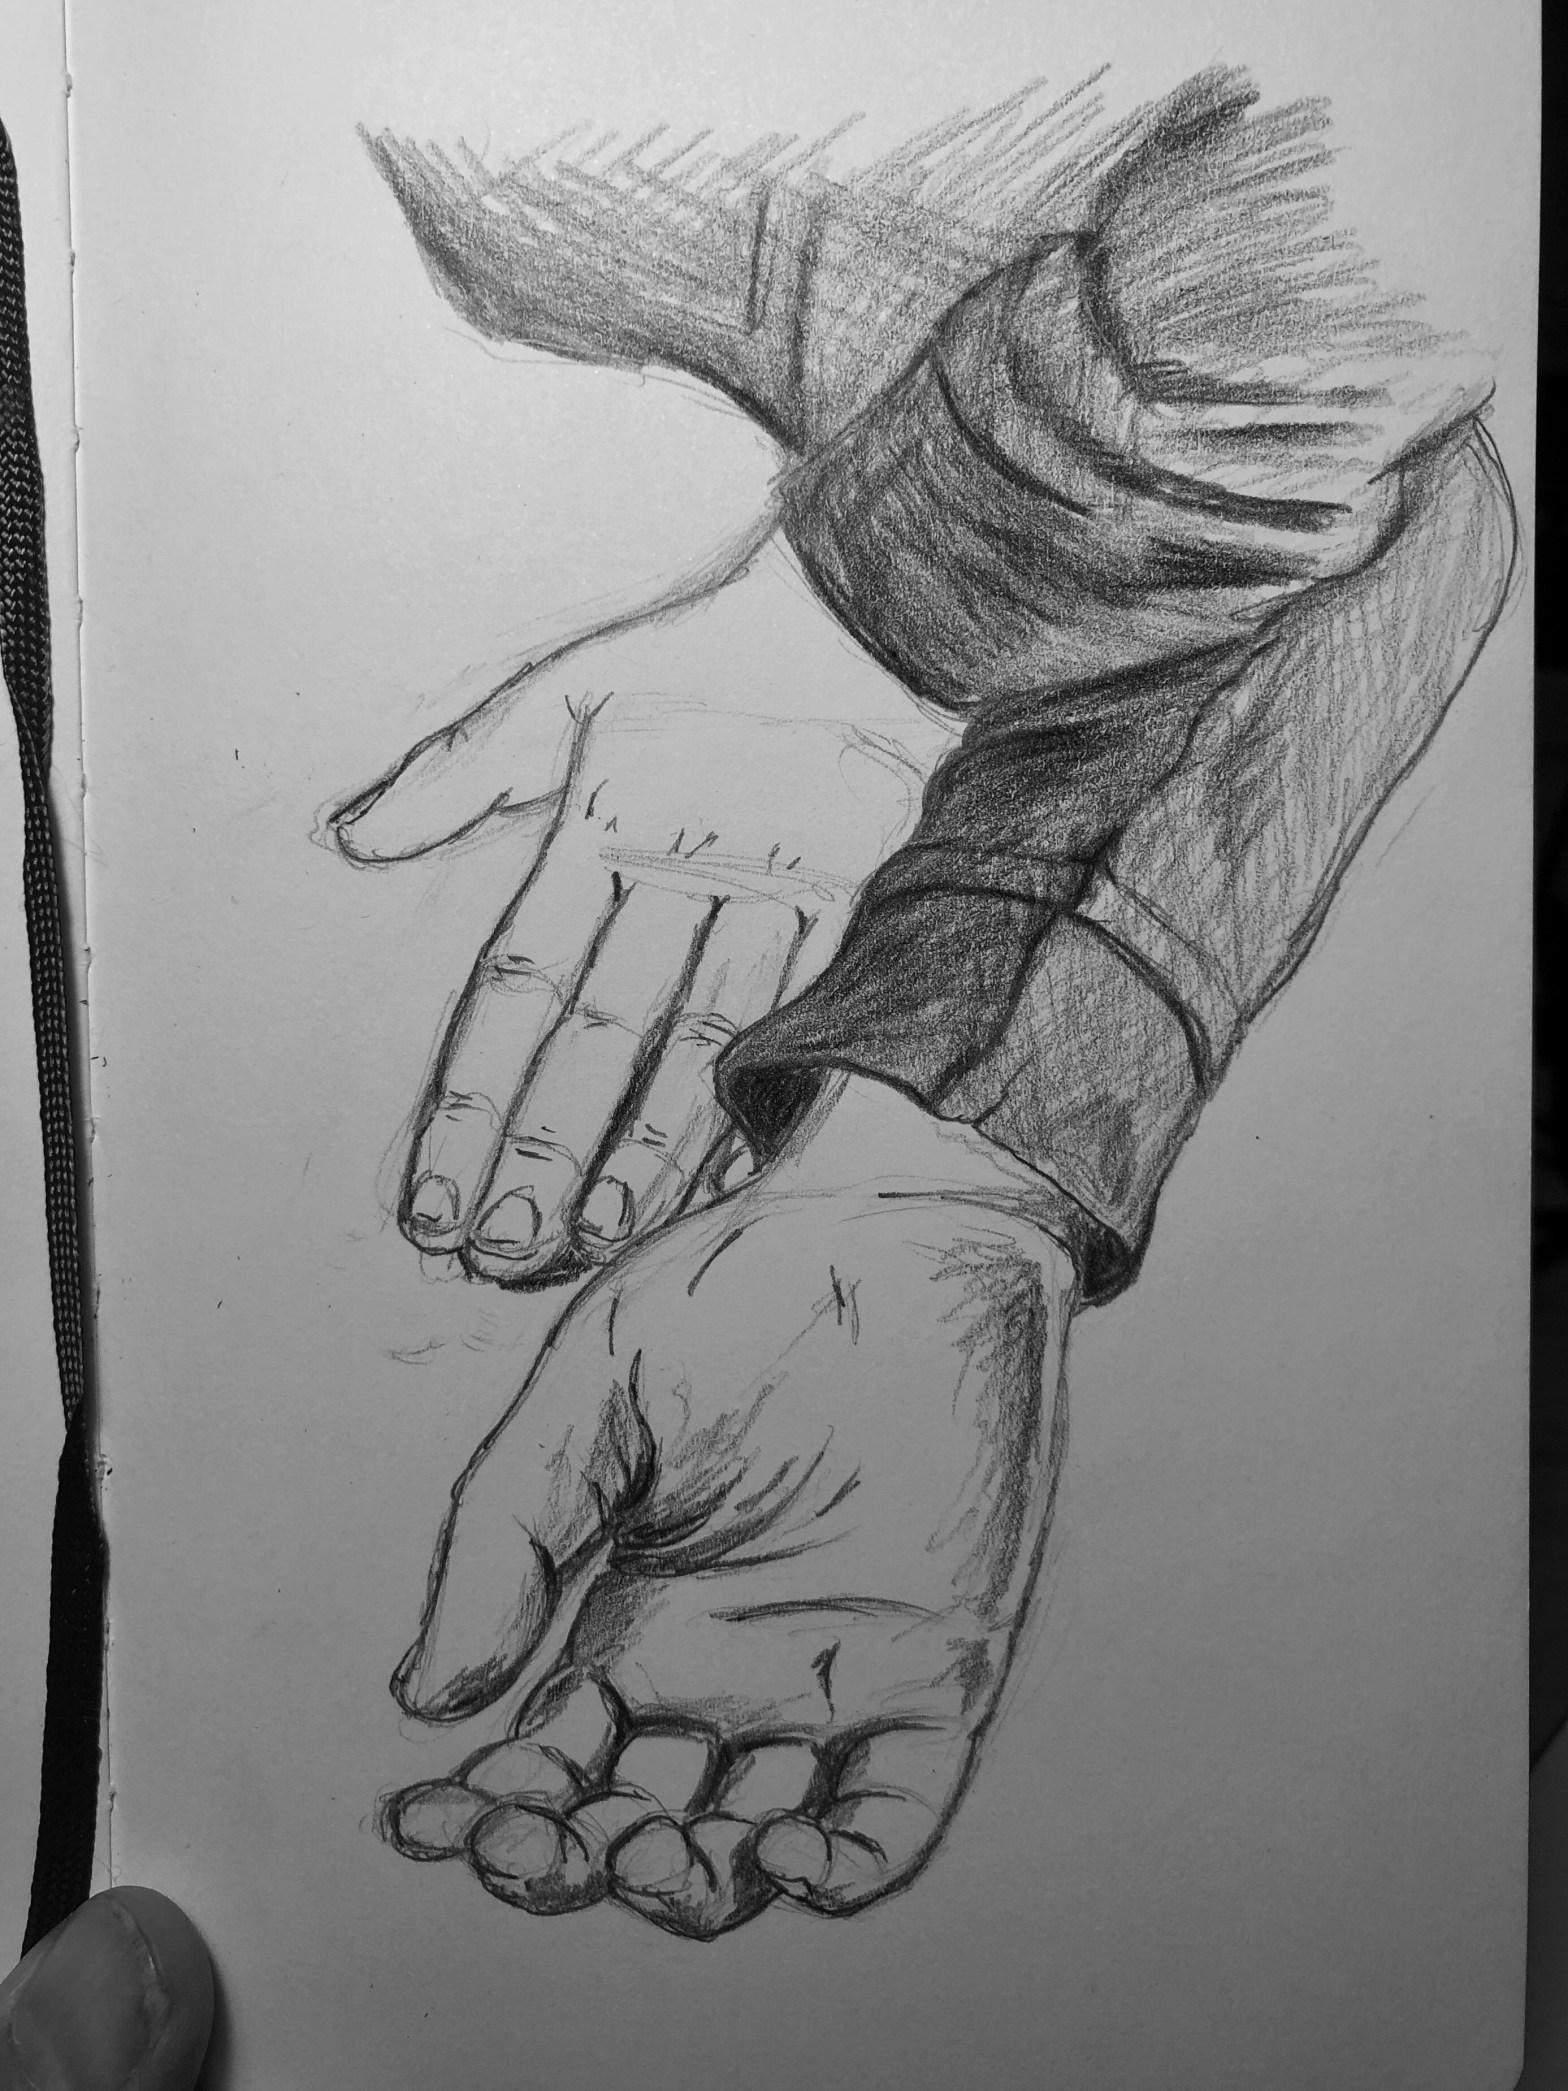 Sketch of two hands, one lying face up and the other face down.